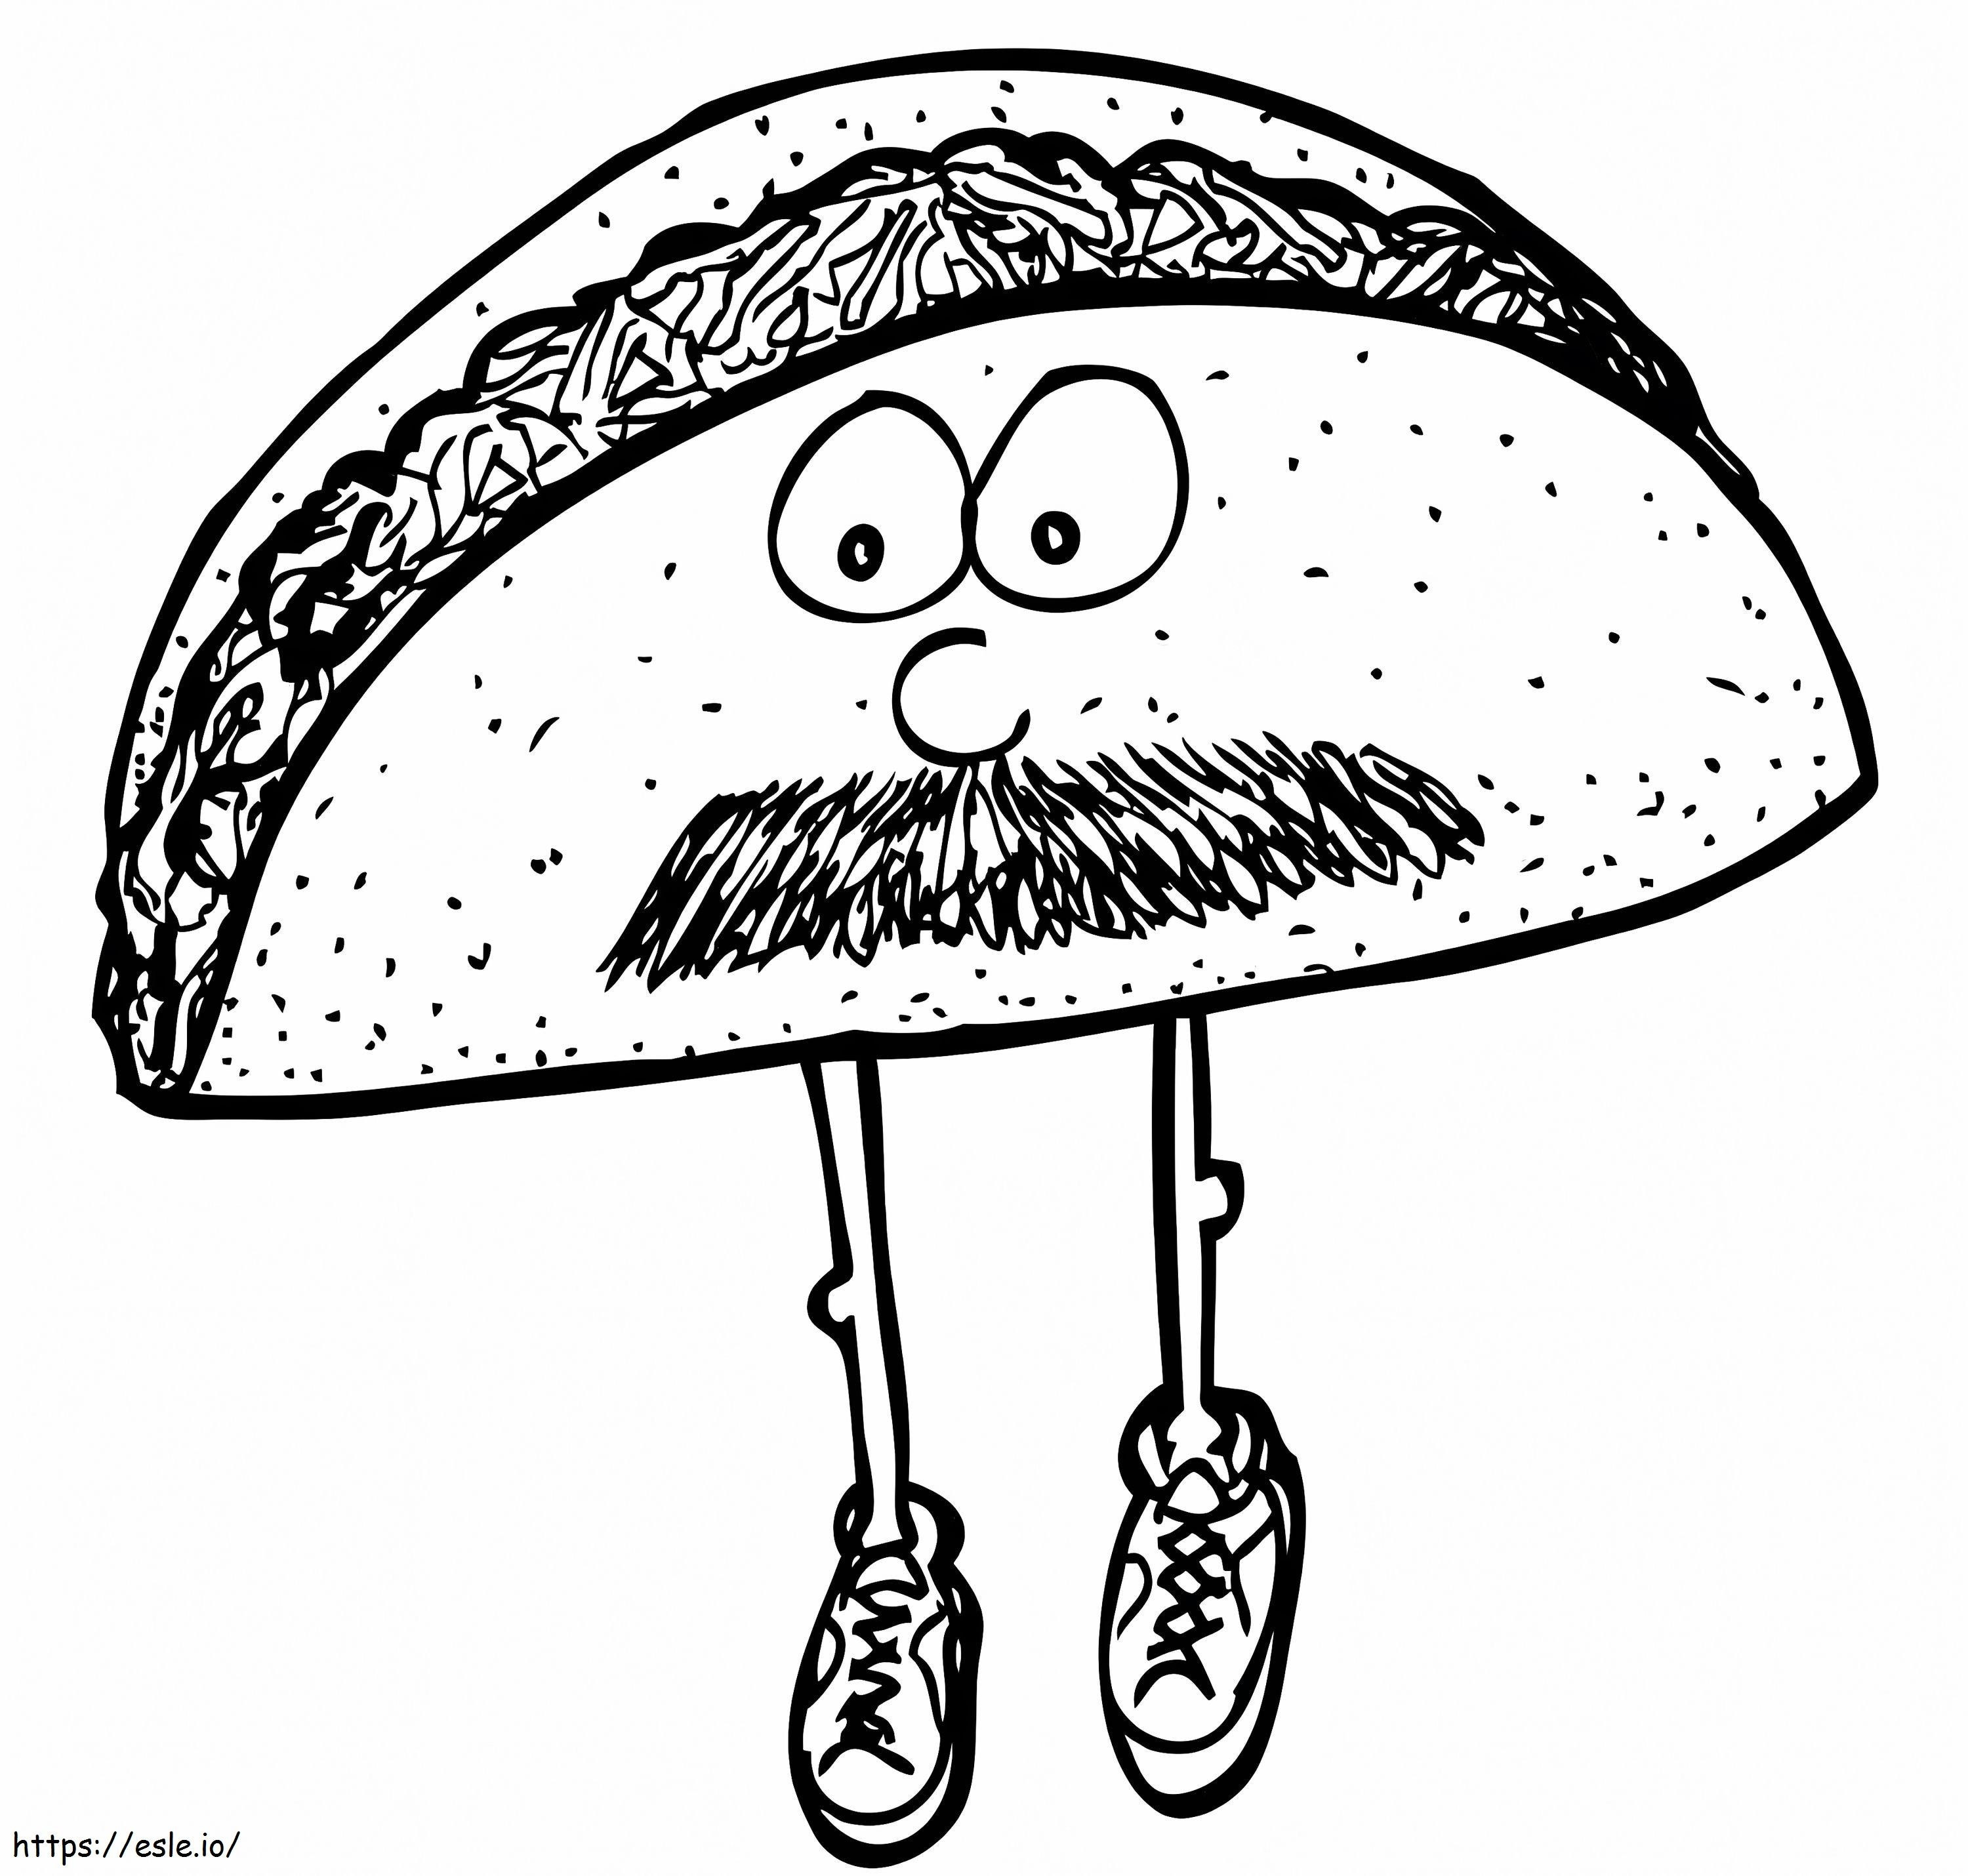 Funny Taco coloring page